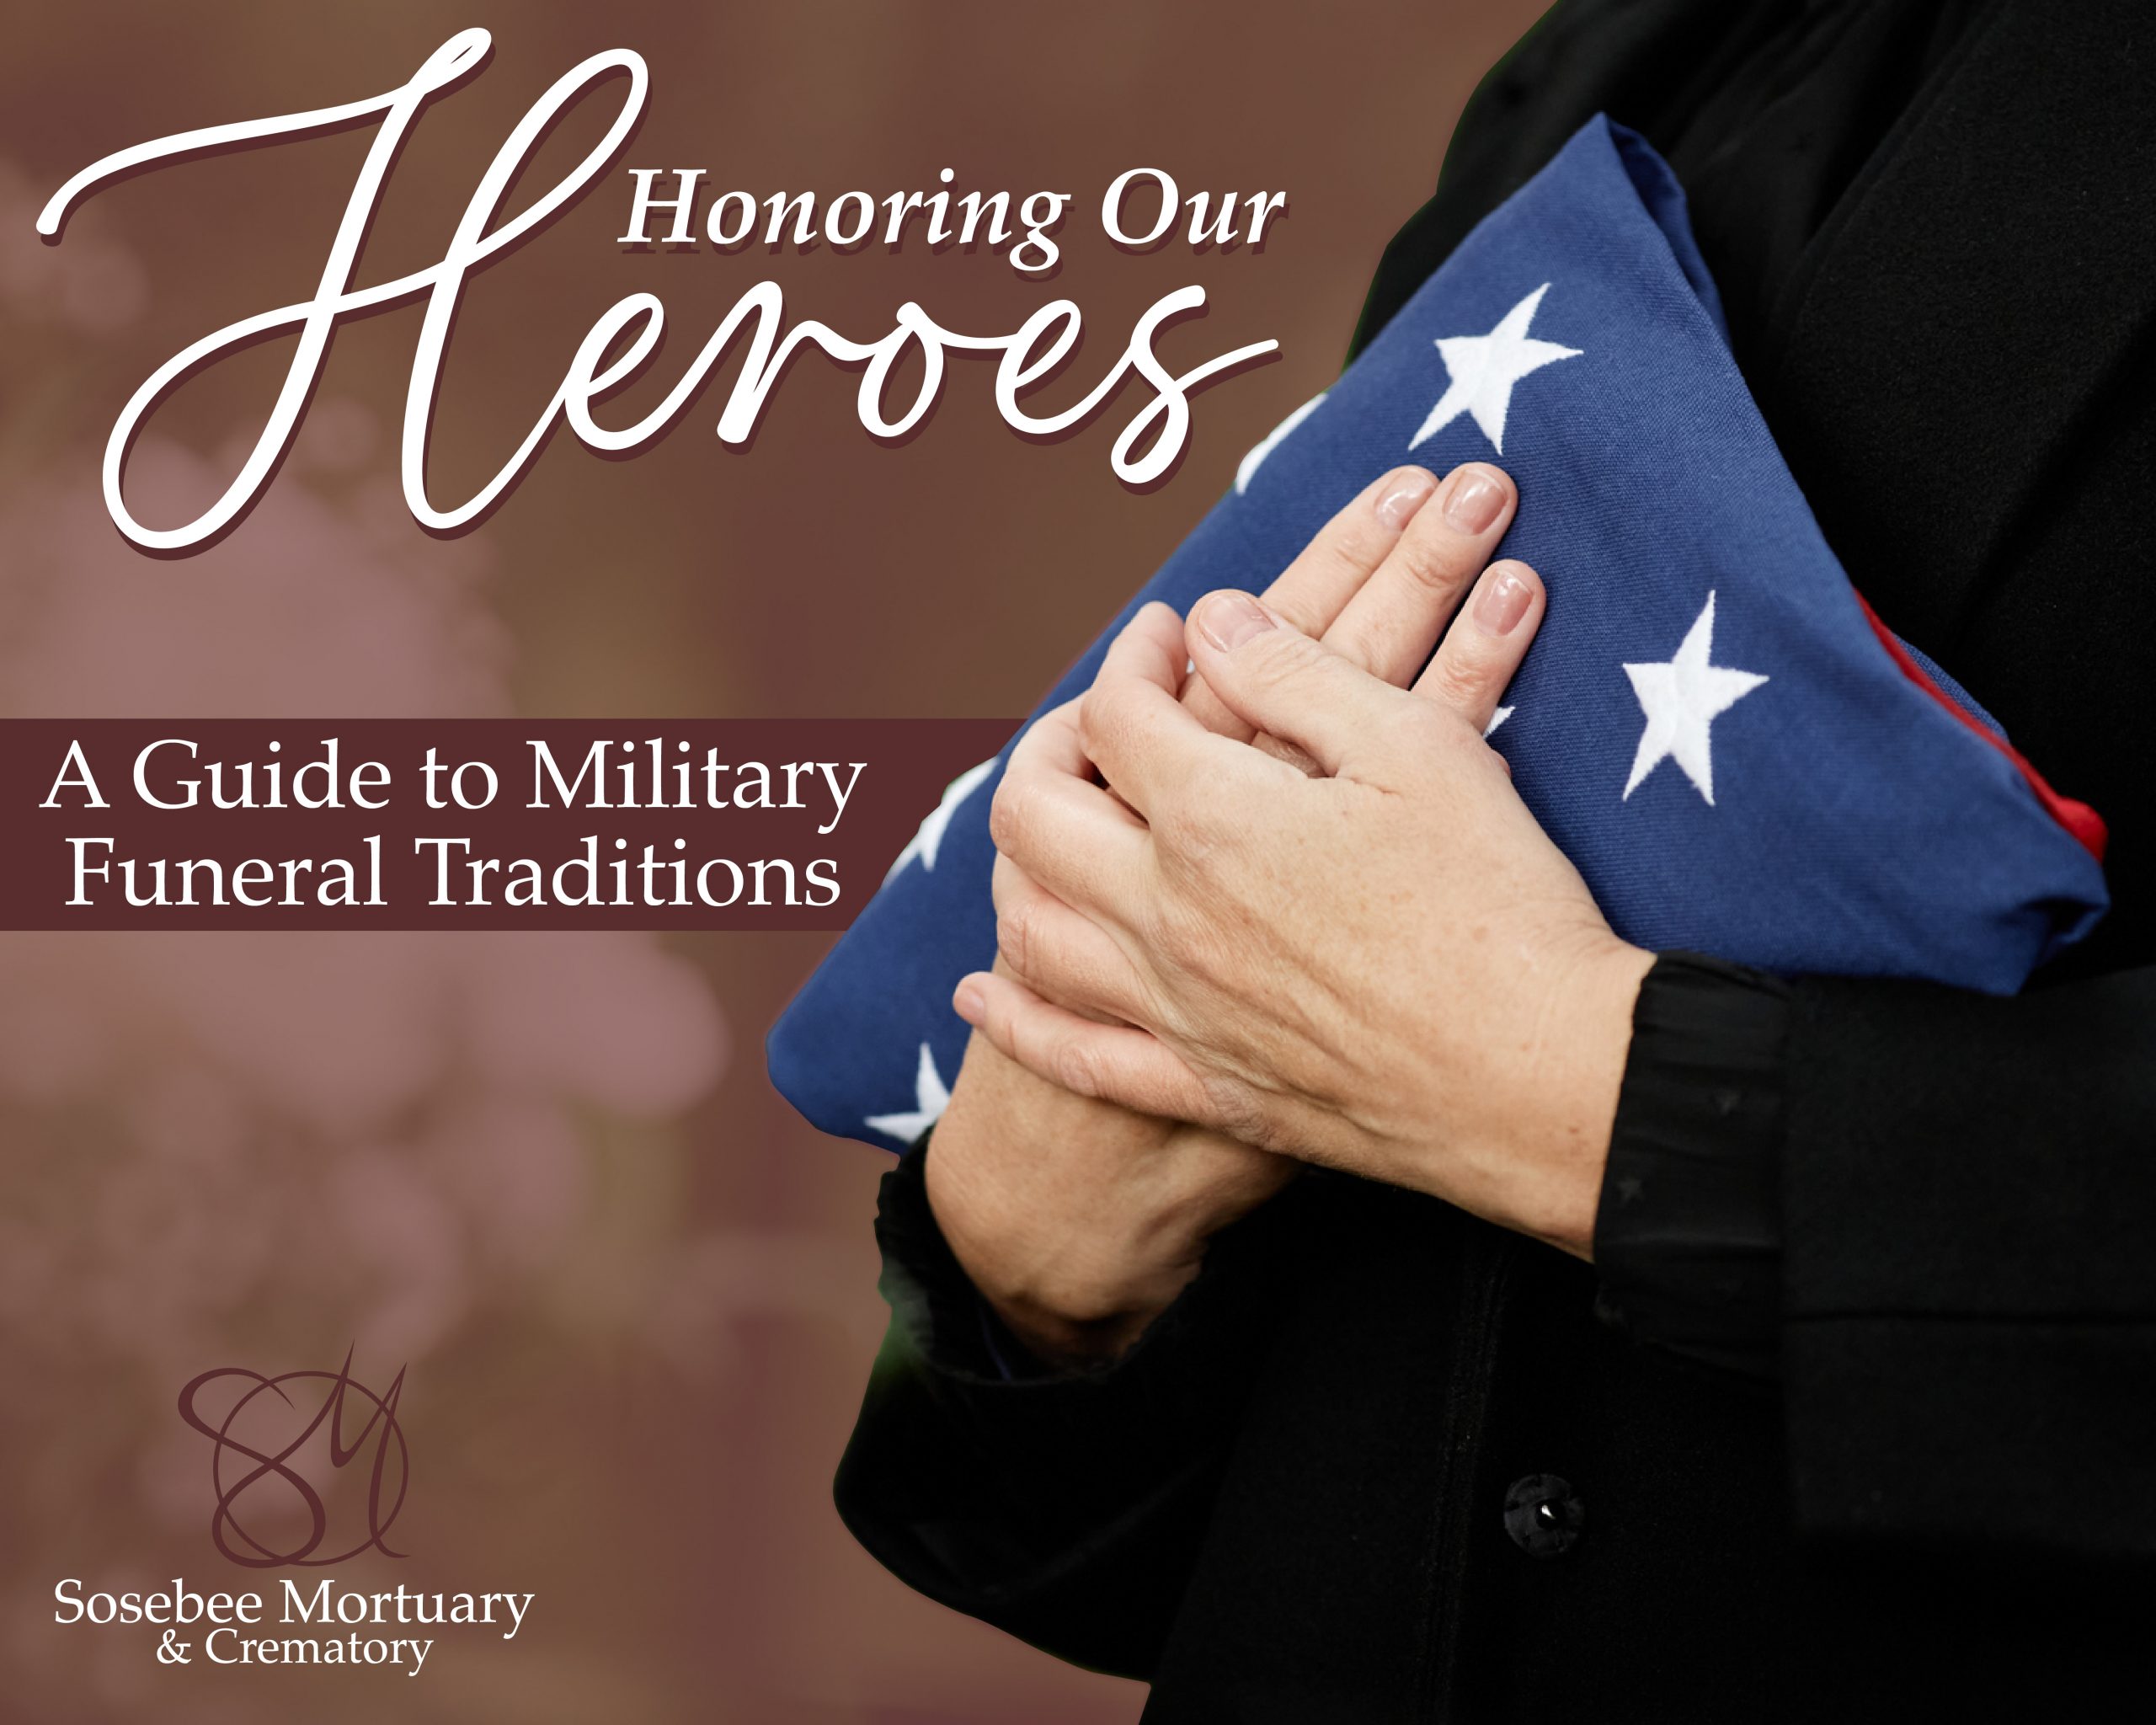 Man holding folded American flag with title "Honoring Our Heroes: A Guide to Military Funeral Traditions."